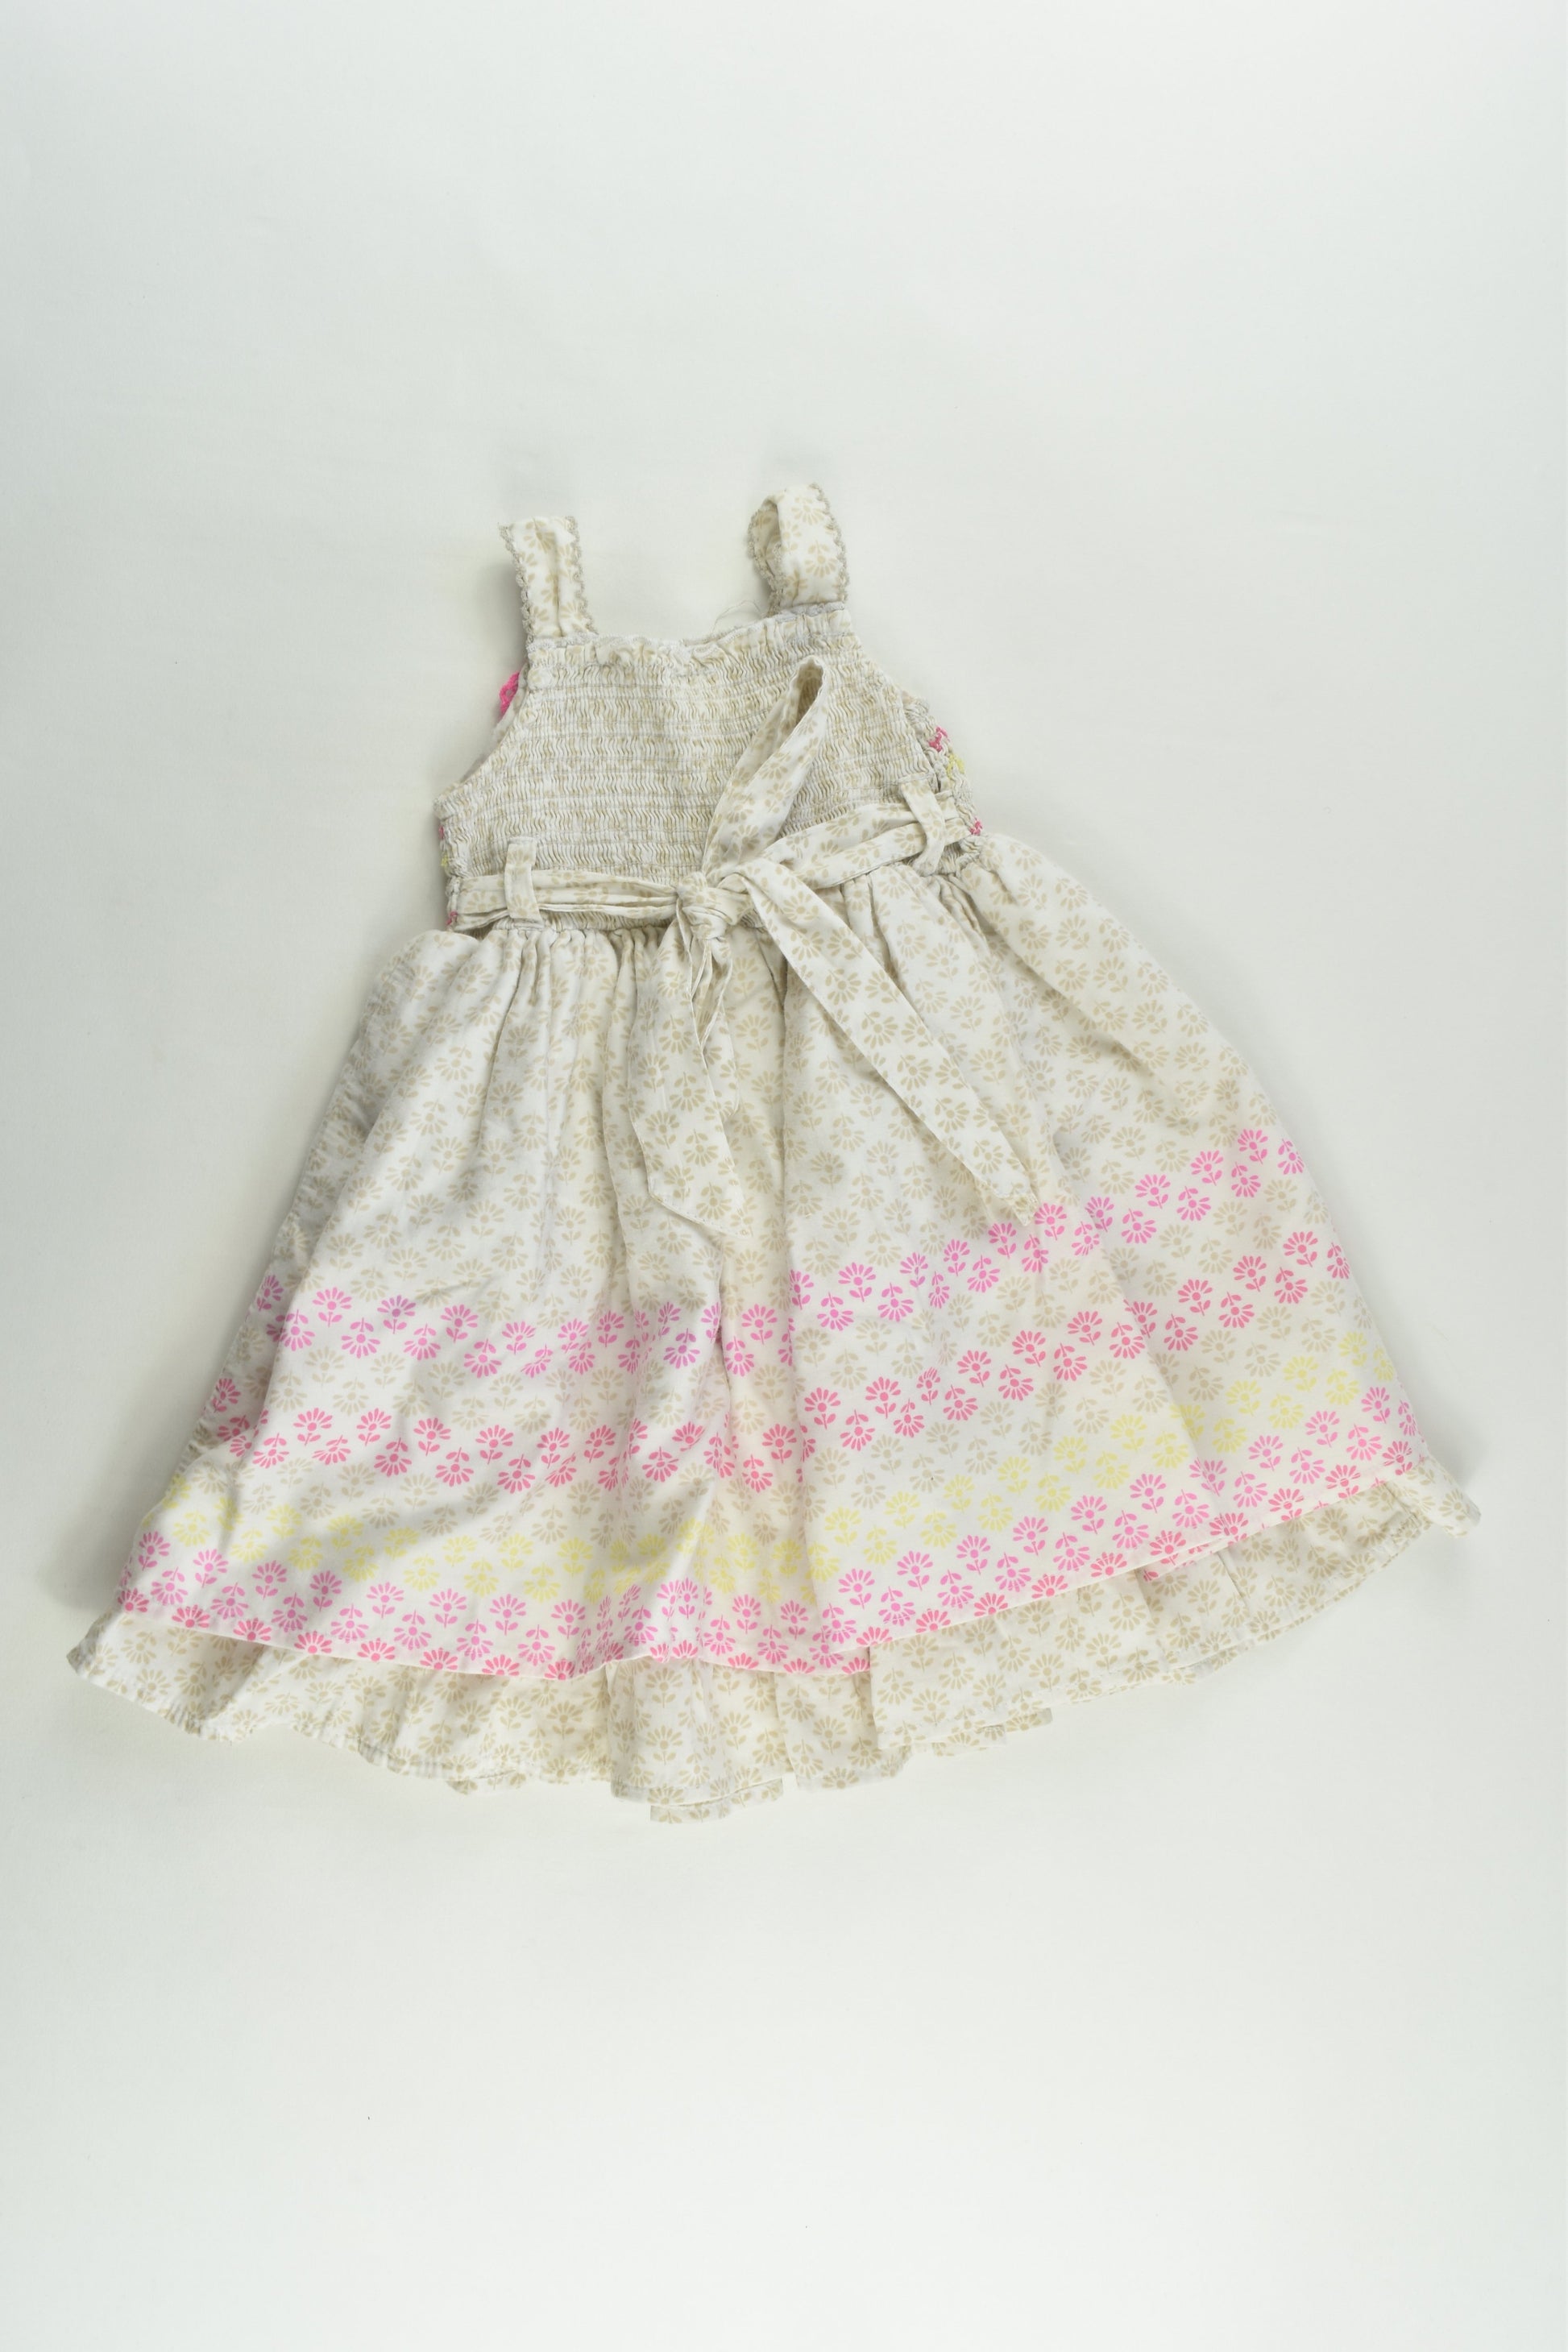 Target Size 0 (6-12 months) Lined Dress